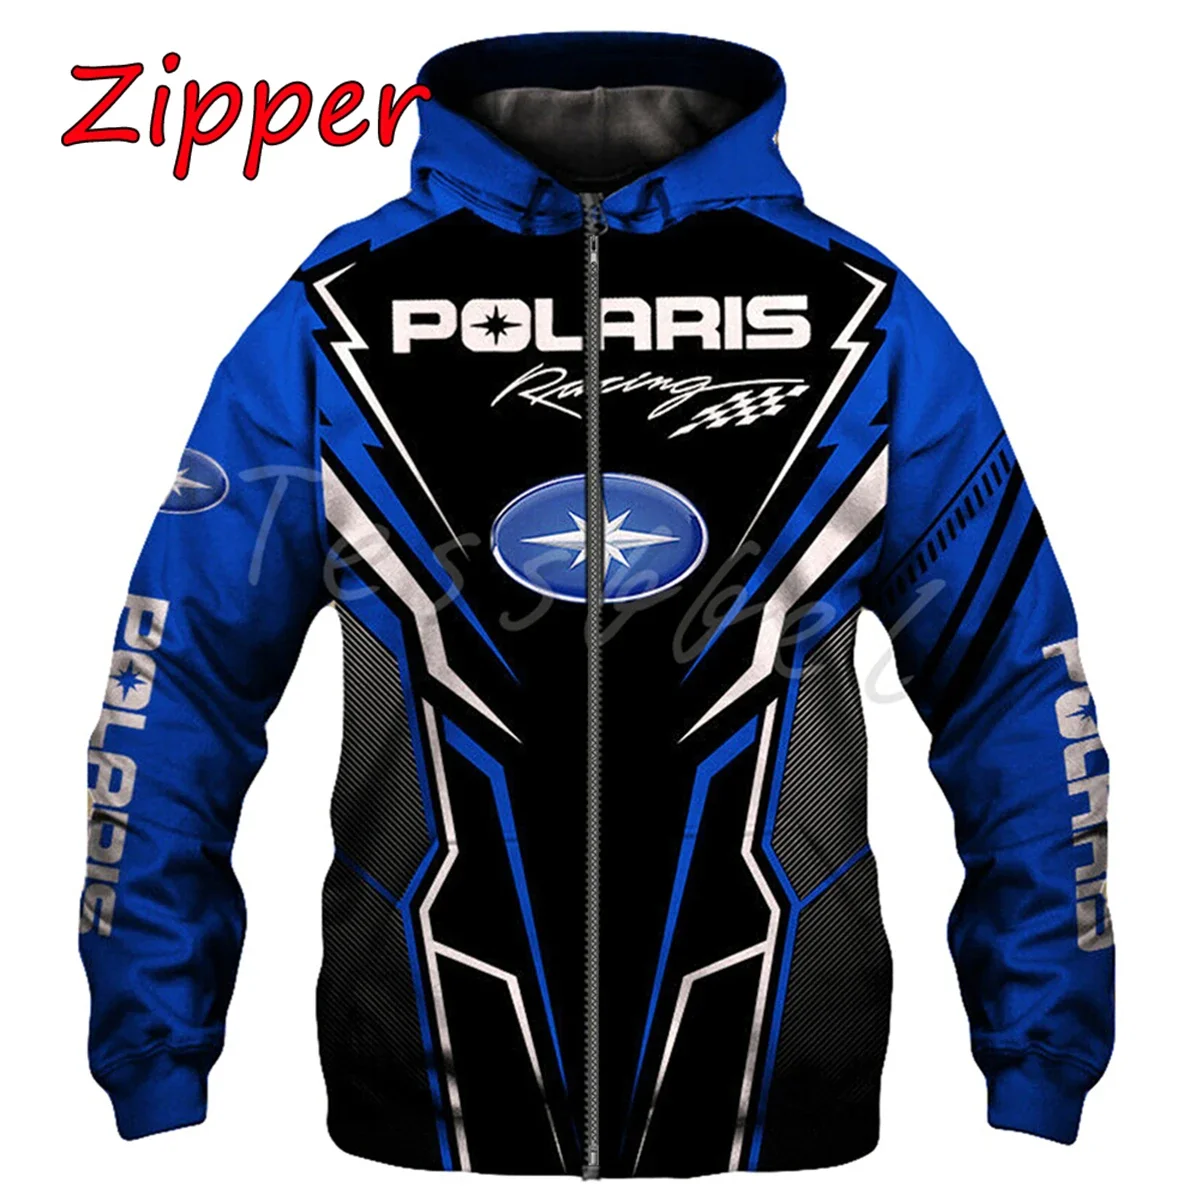 

2023 Polaris Racing Rzr Snowmobile Fashion Casual Zip Hoodie Top Hot Sale Men's and Women's Spring and Autumn Hooded Jacket